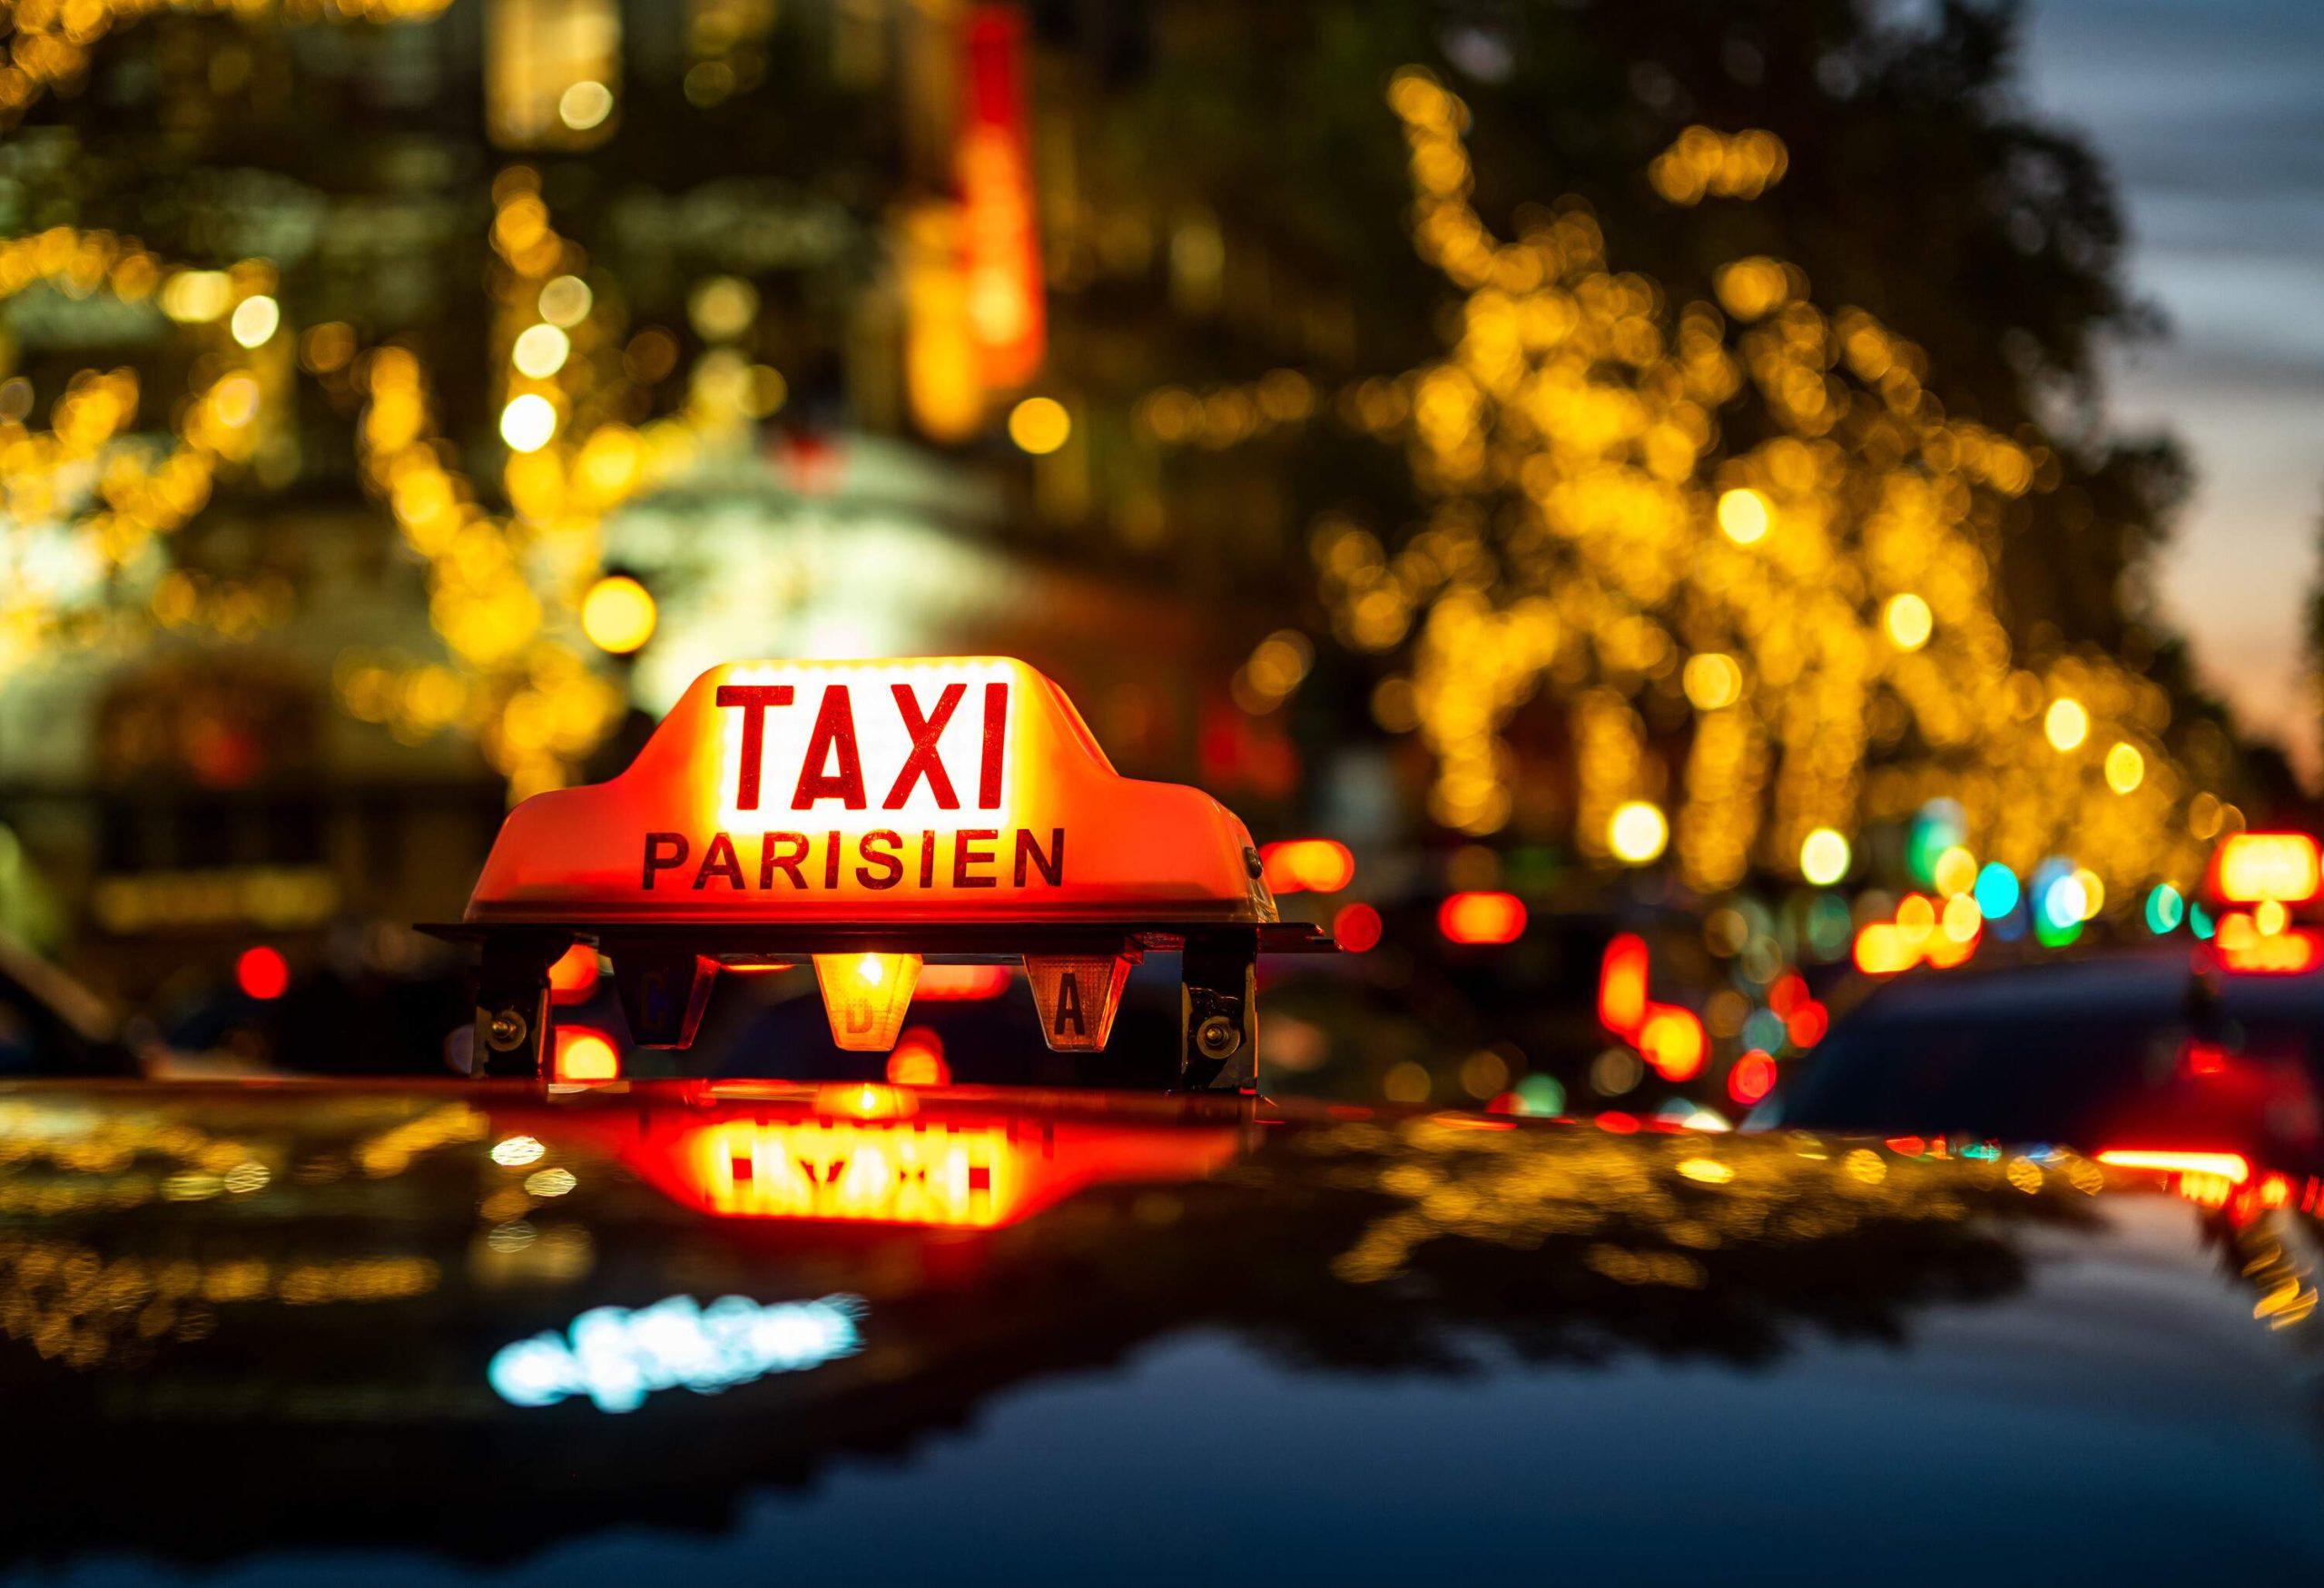 Taxi sign with Paris street at night in background.